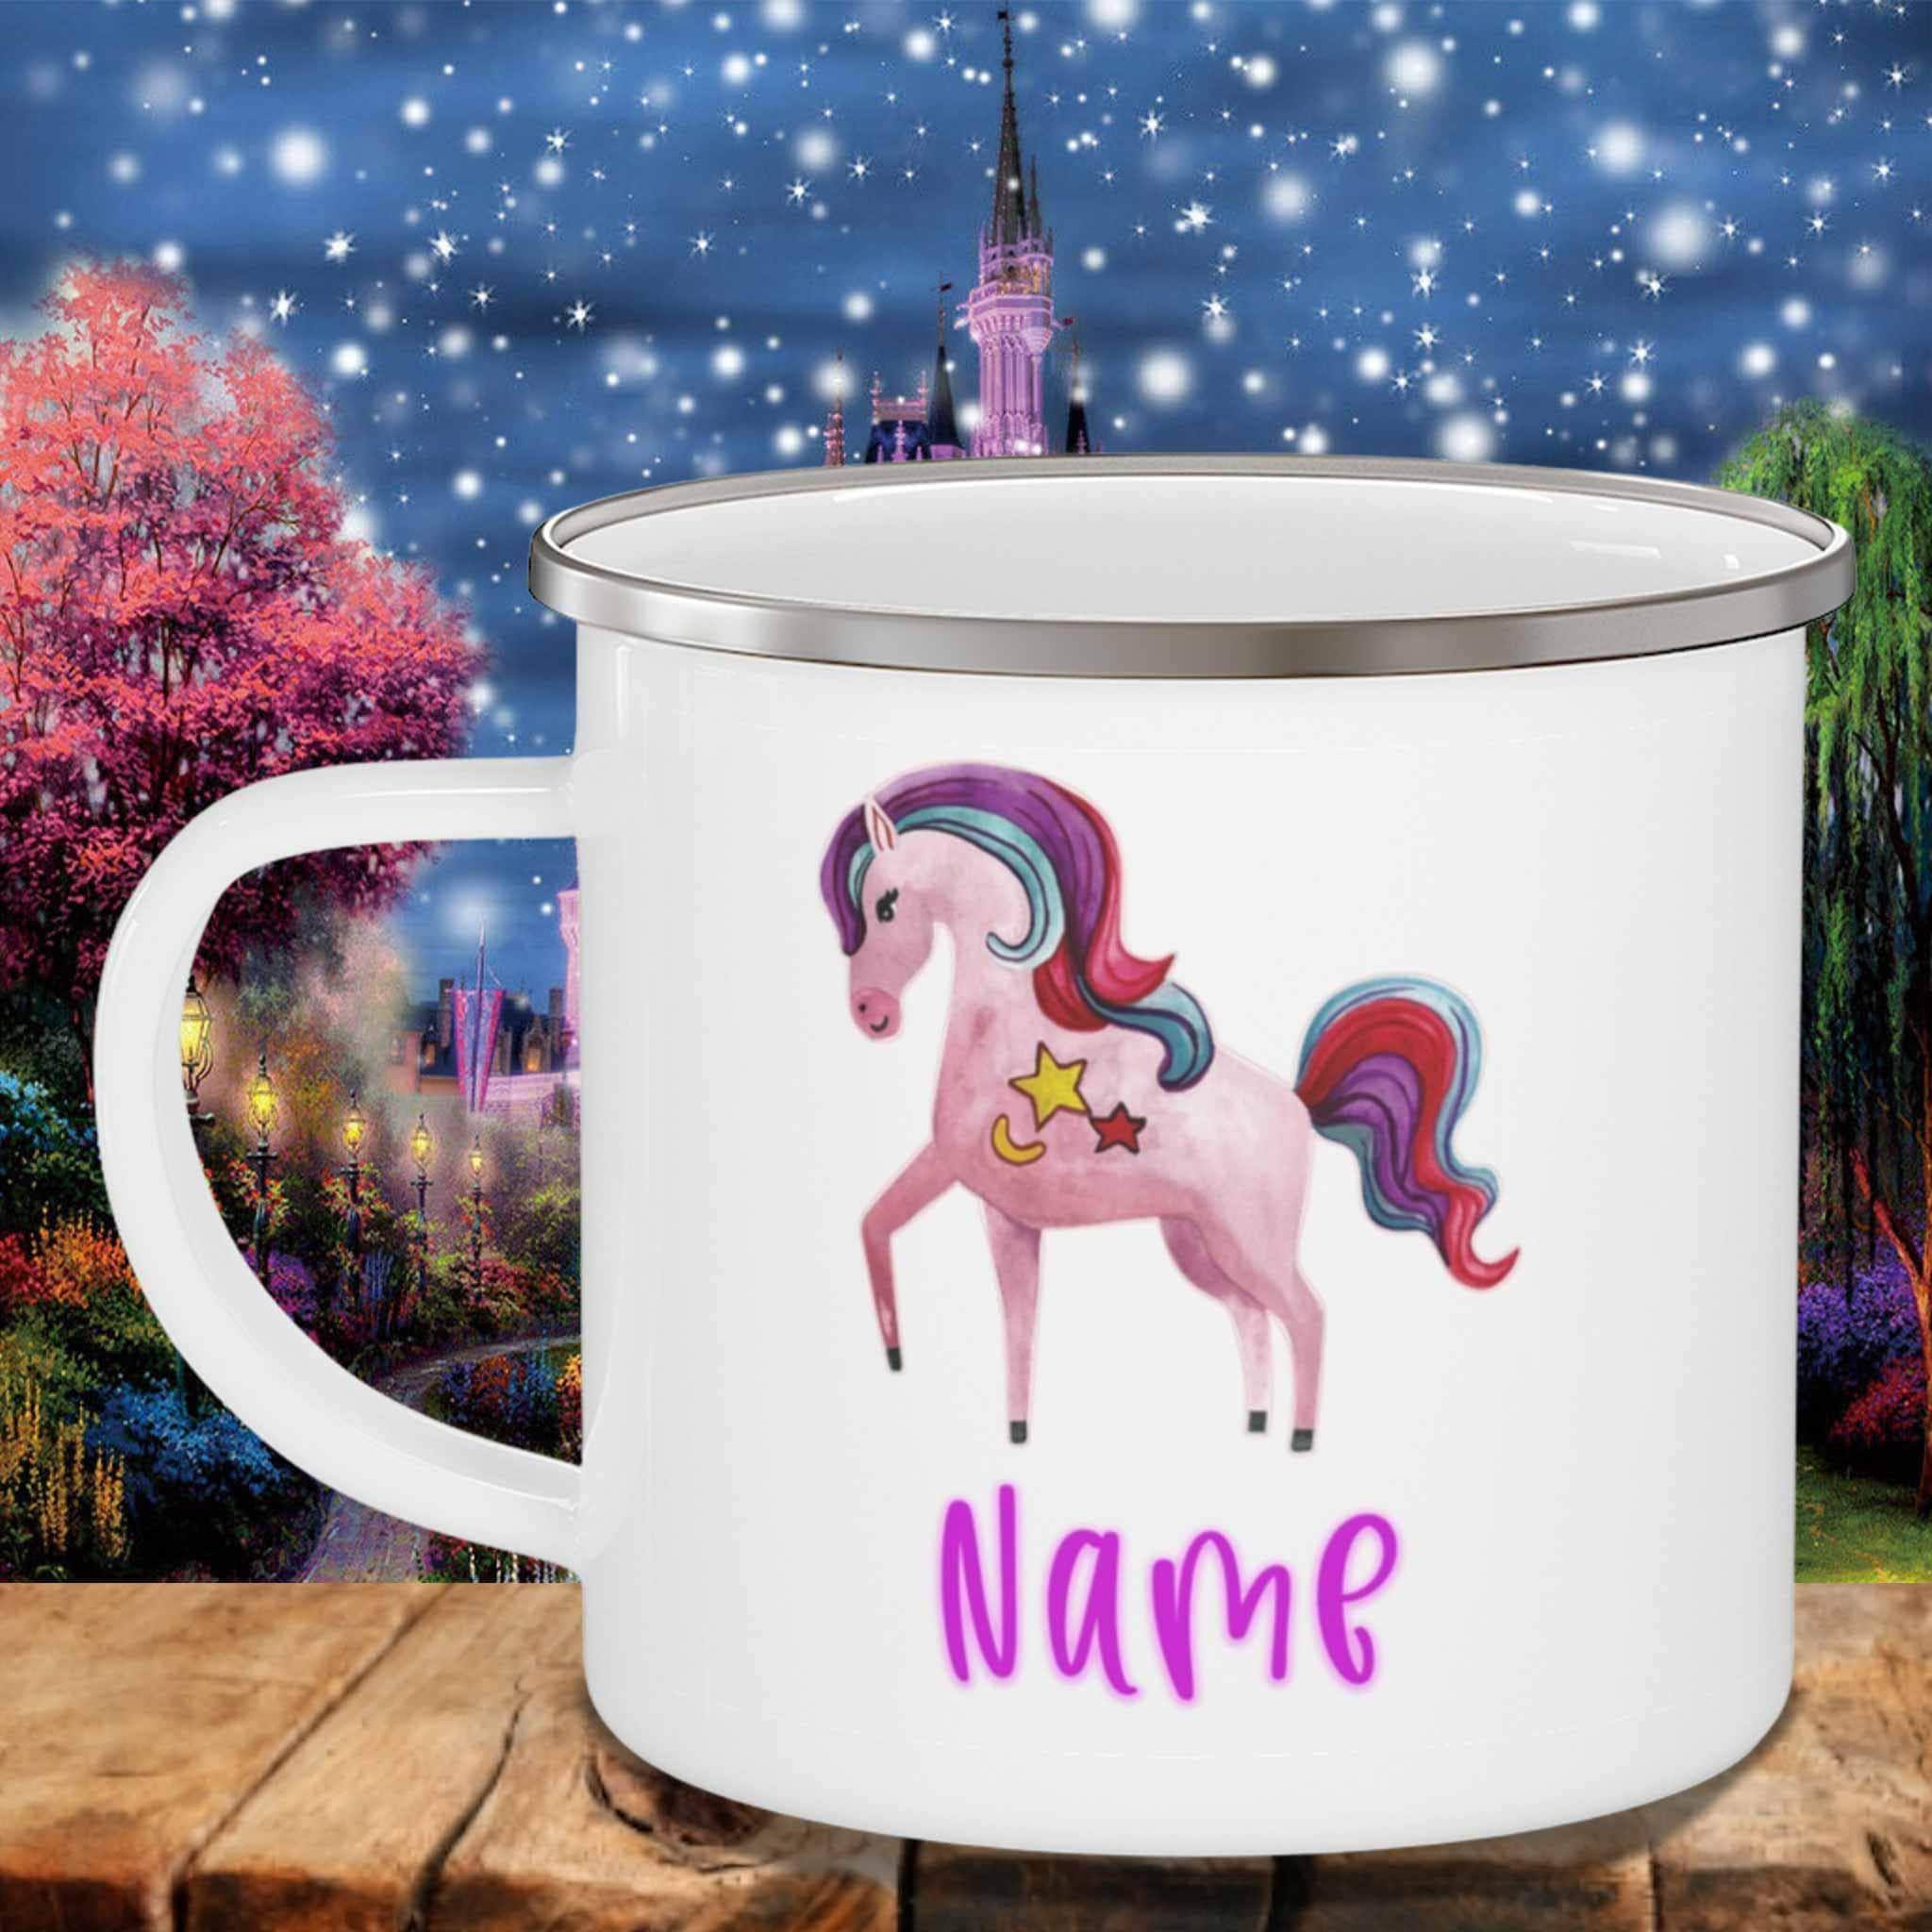 Personalized Outer Space Dinosaurs Mug Gift for Kids Kids Mugs Personalized  Gift Space Enamel Mug for Boys Girls Toddlers Custom Mug 